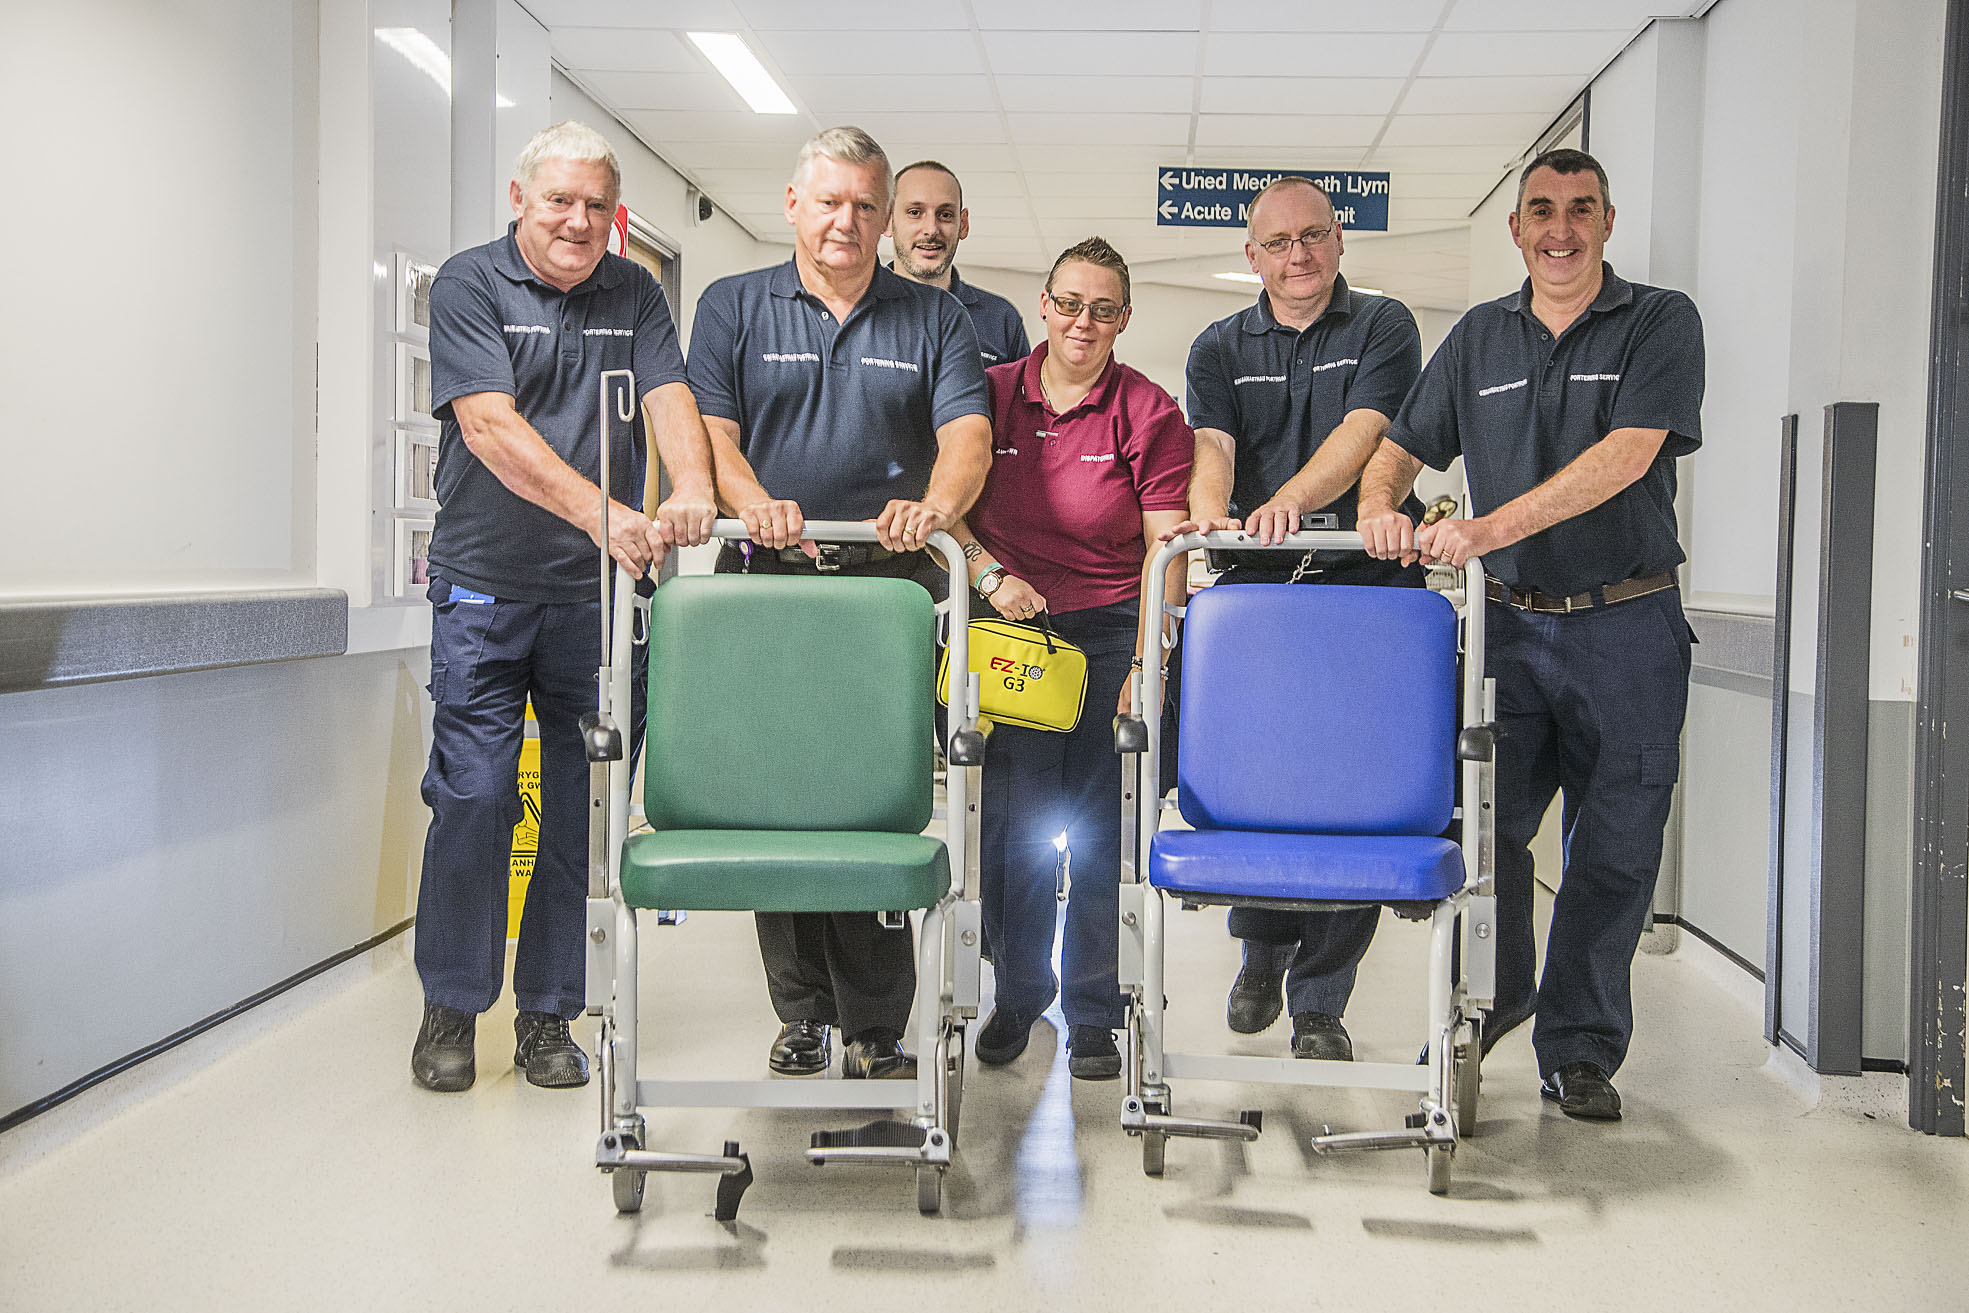 Spotlight shines on hospital porters whose dedication helps save lives at Ysbyty Glan Clwyd